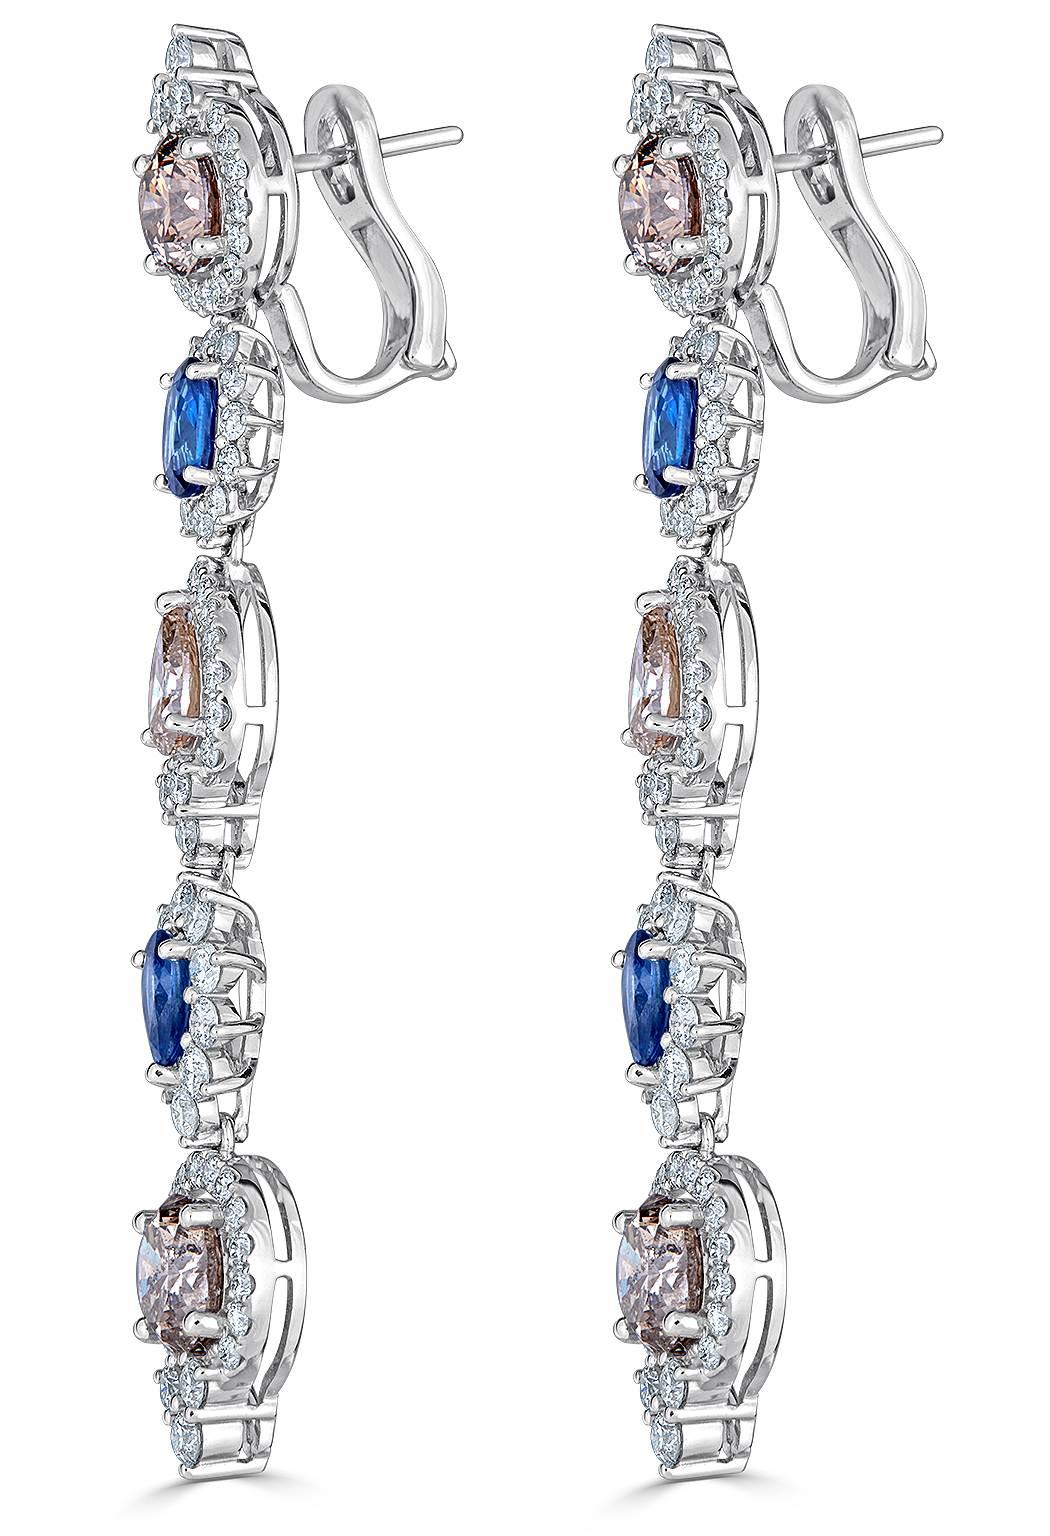 Linear earrings are the biggest trend this season.  This sleek and chic earring has 6 solitaire brown diamonds alternating 4 blue sapphires with a shimmering white diamond halo around each stone.  Post / Omega Clip

Brown Diamond approx. -